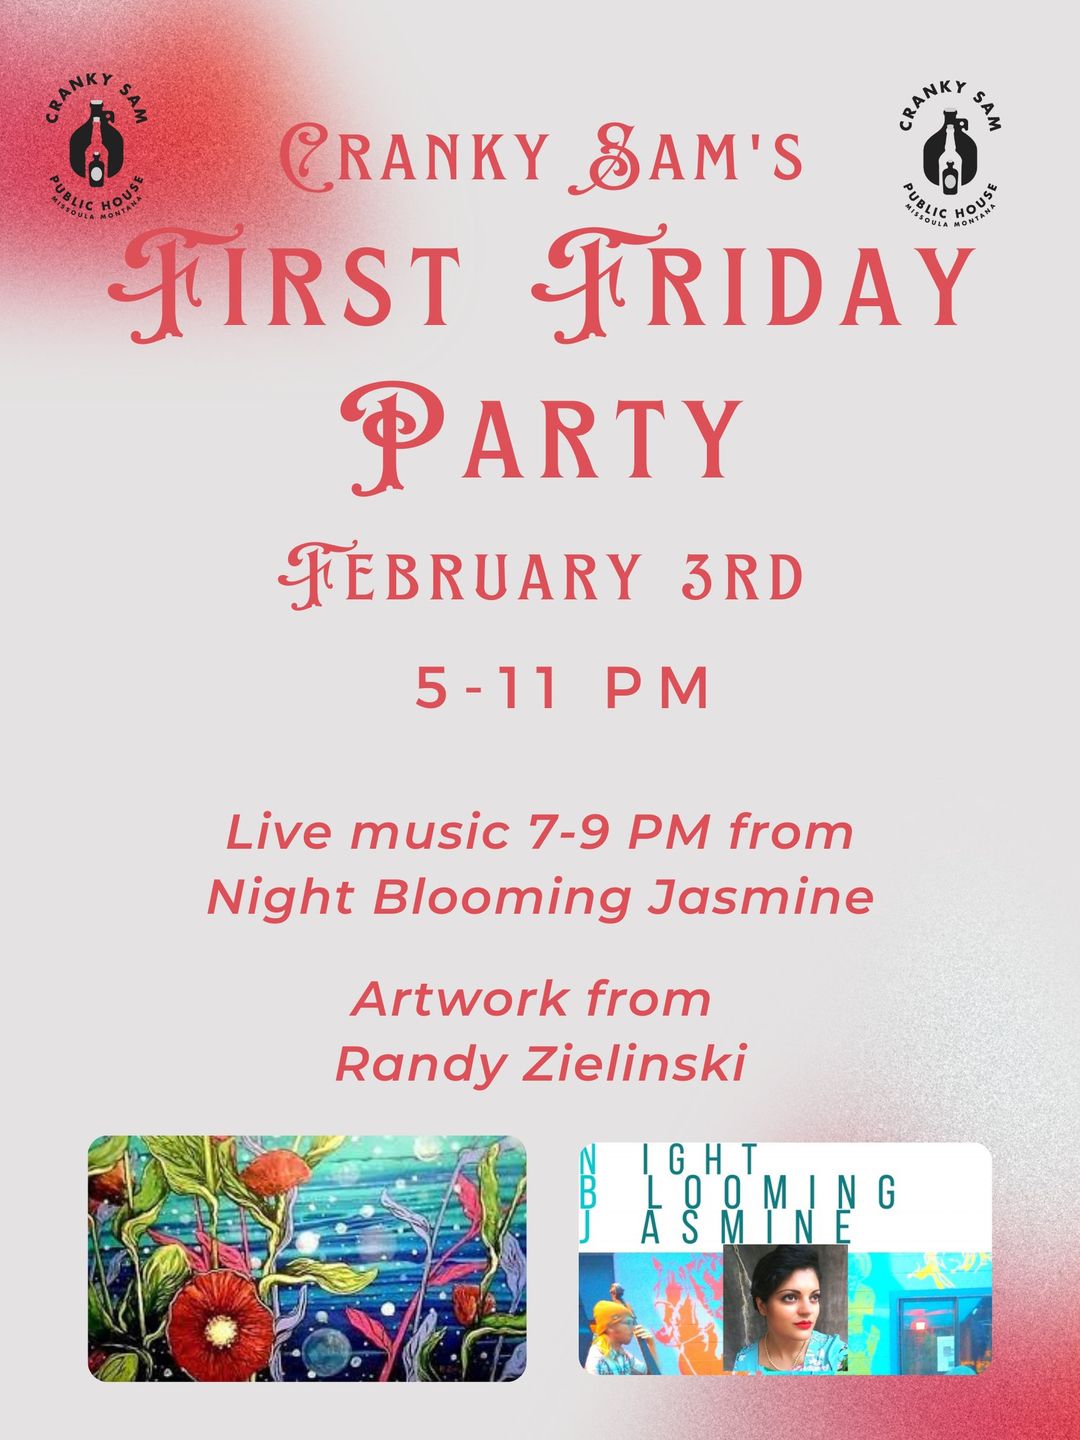 First Friday Party featuring Night Blooming Jasmine at Cranky Sam Public House in Downtown Missoula on February 3, 2023